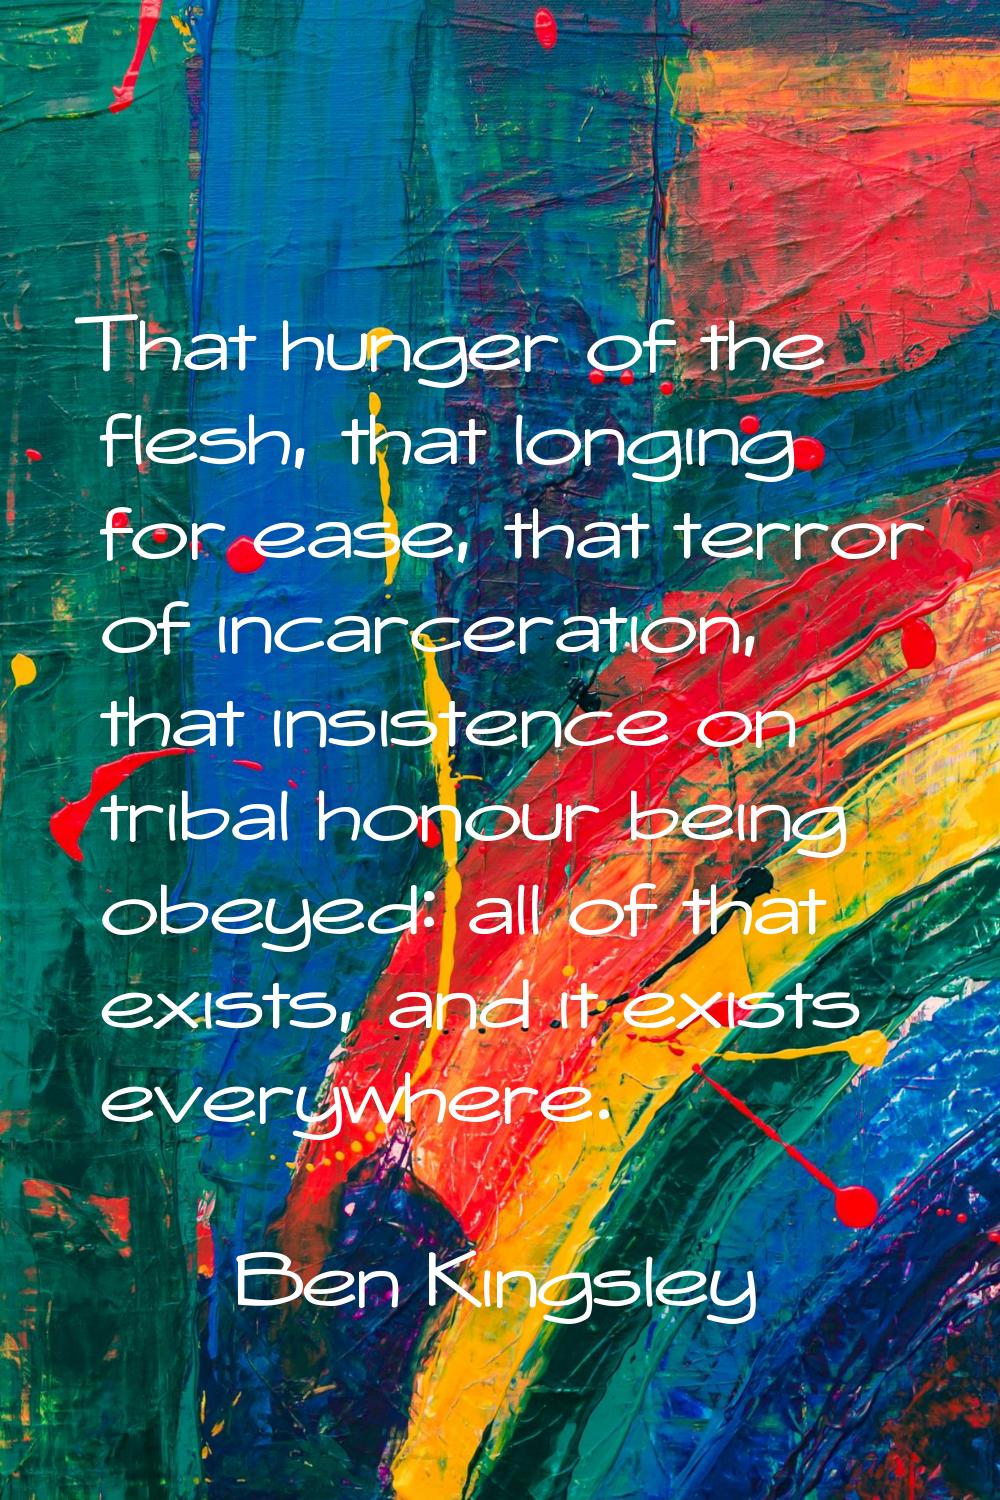 That hunger of the flesh, that longing for ease, that terror of incarceration, that insistence on t